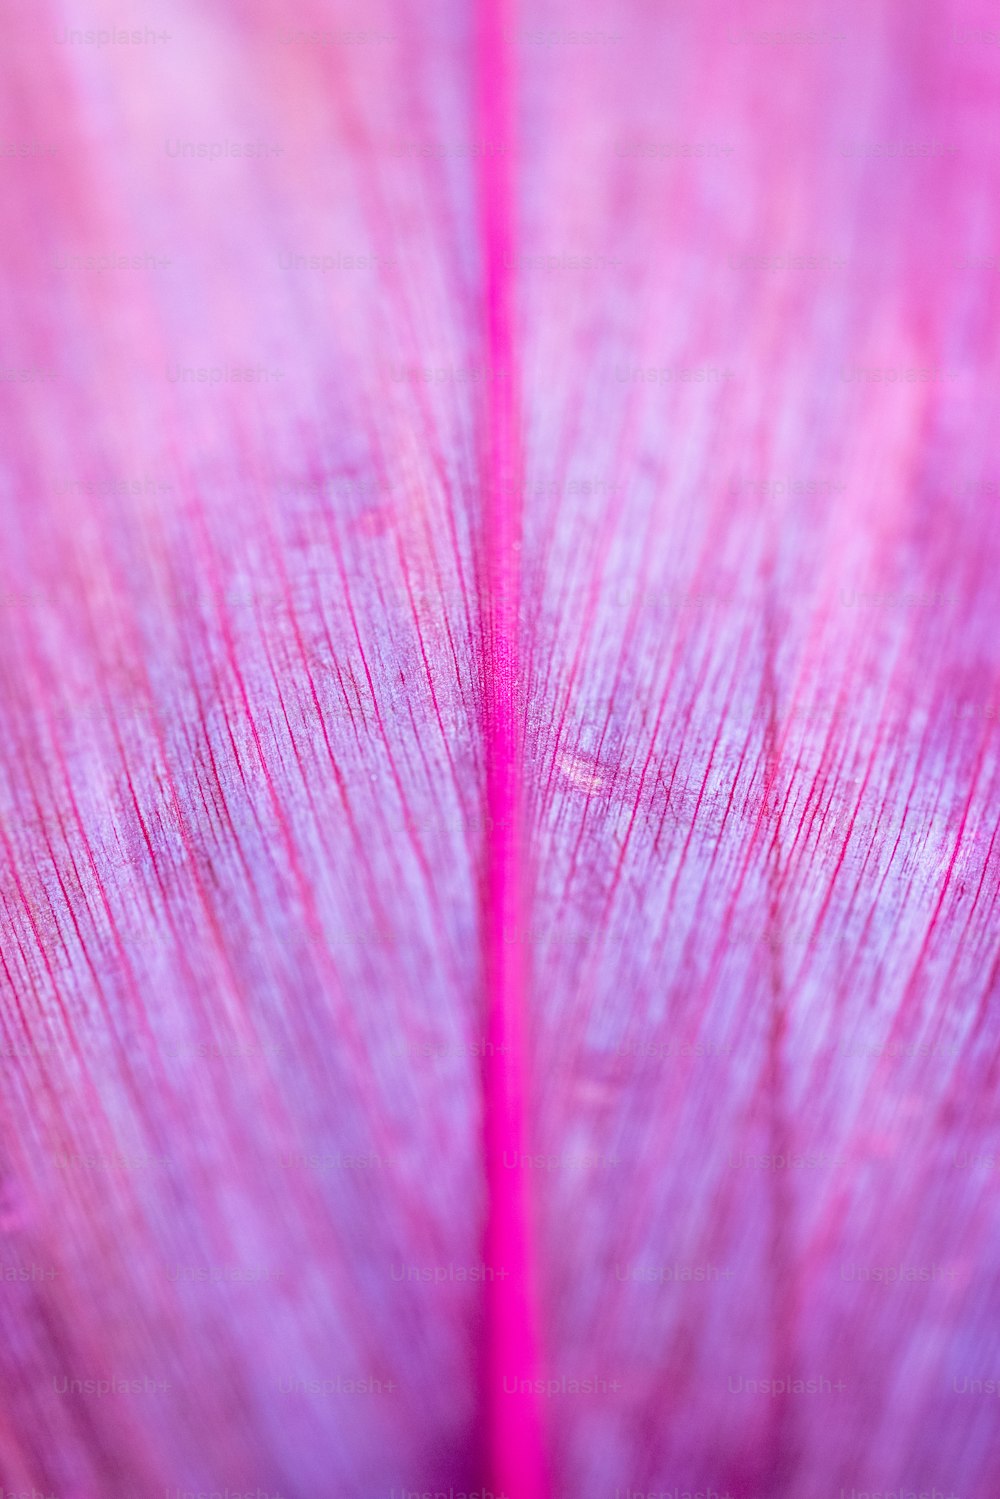 a close up view of a pink leaf